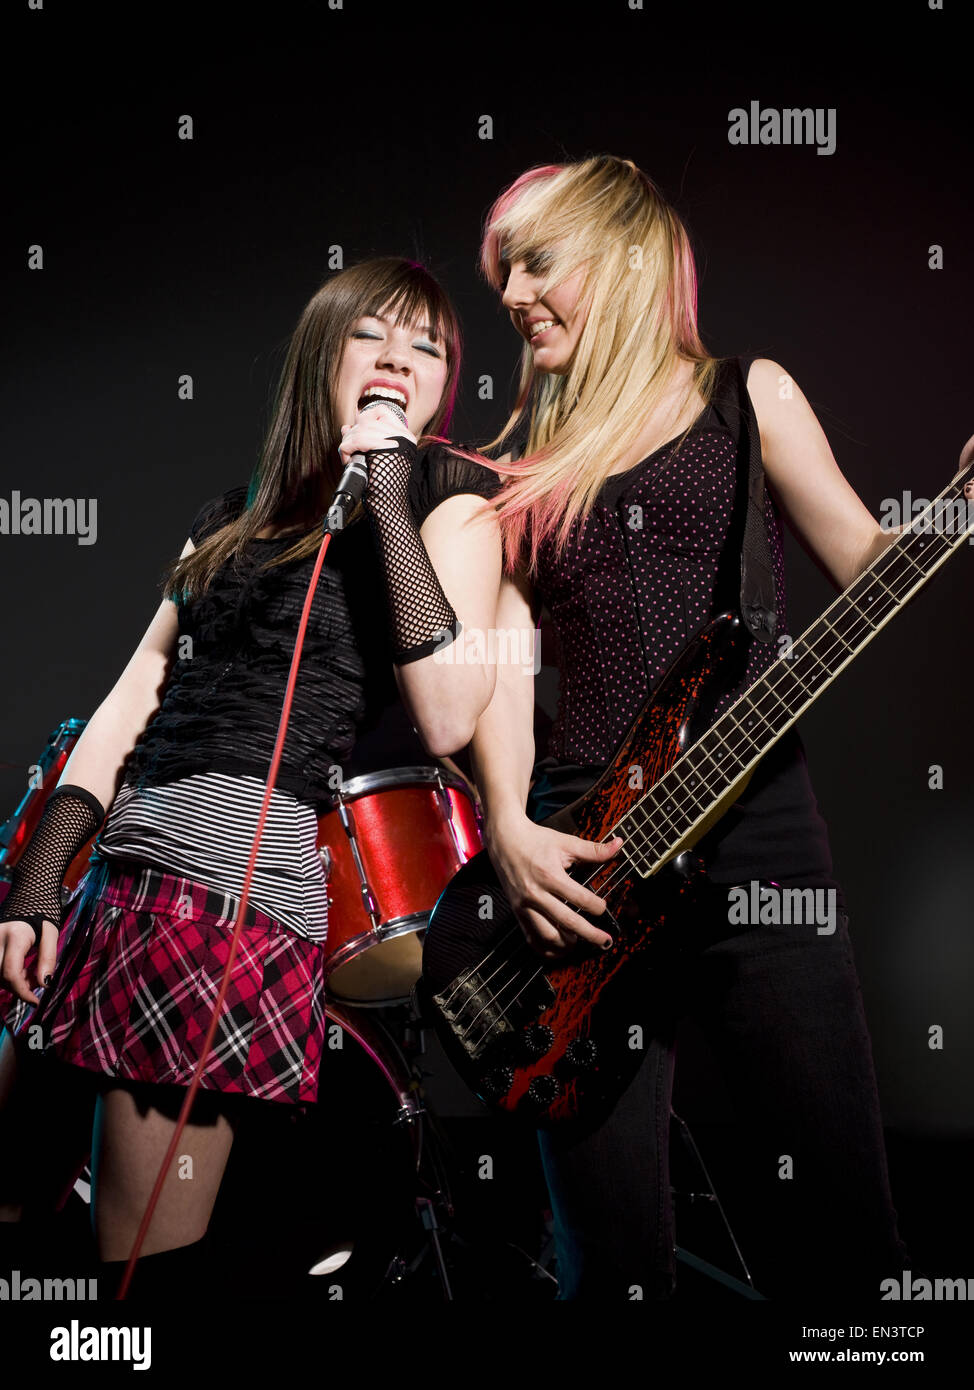 two girls in a rock band Stock Photo